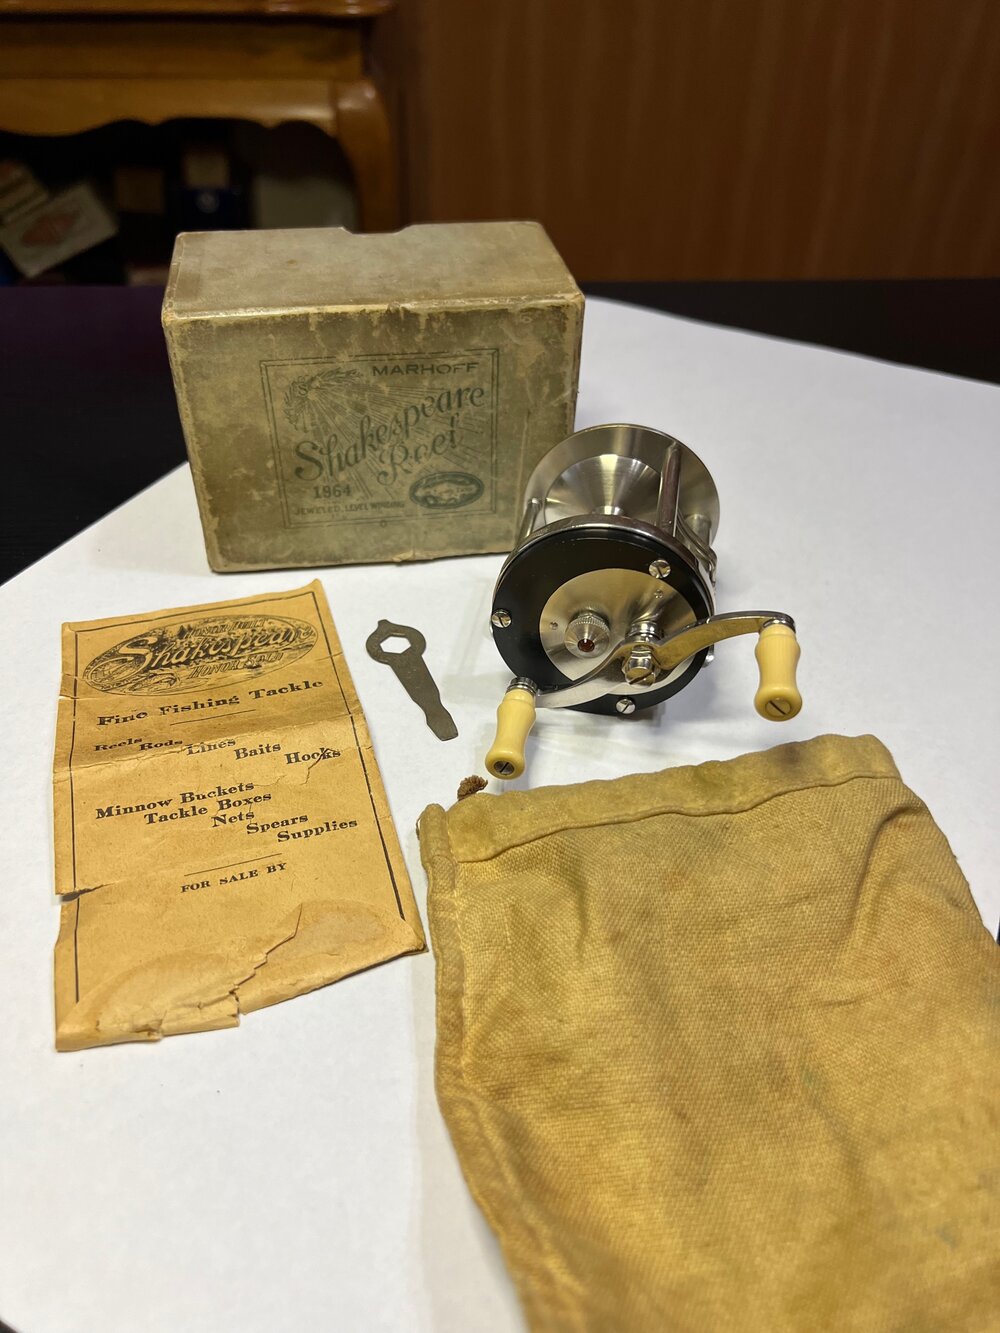 Shakespeare Marhoff Patent Jeweled Level Winding Reel No. 1964